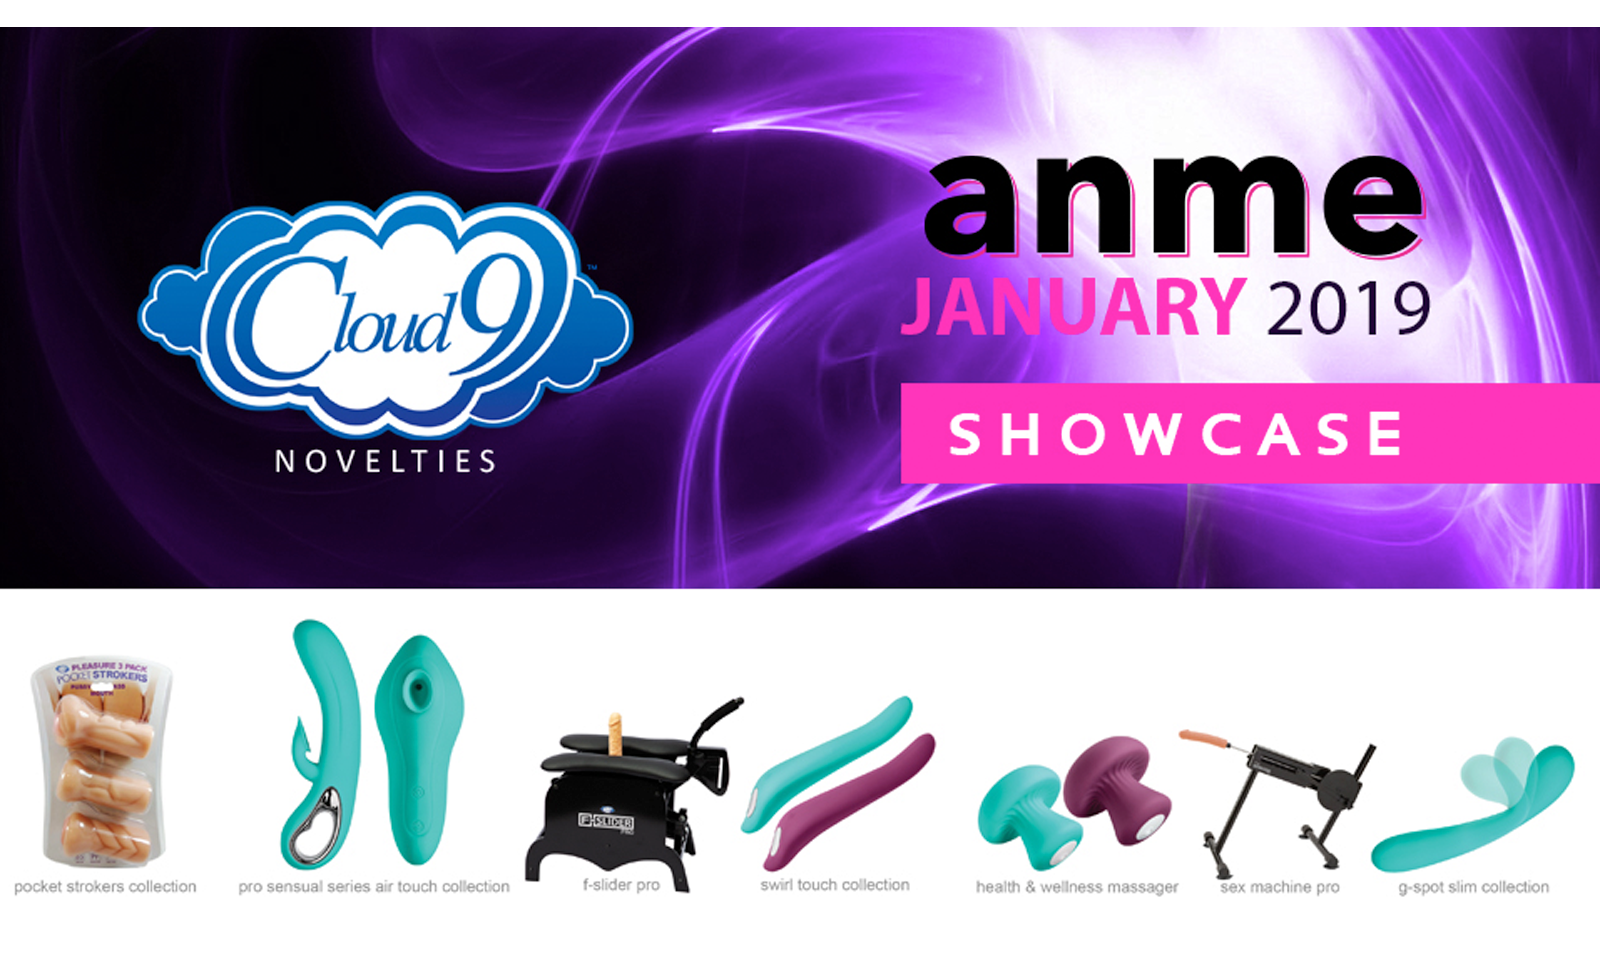 Cloud 9 Novelties Showcases New Products, Ranges at ANME